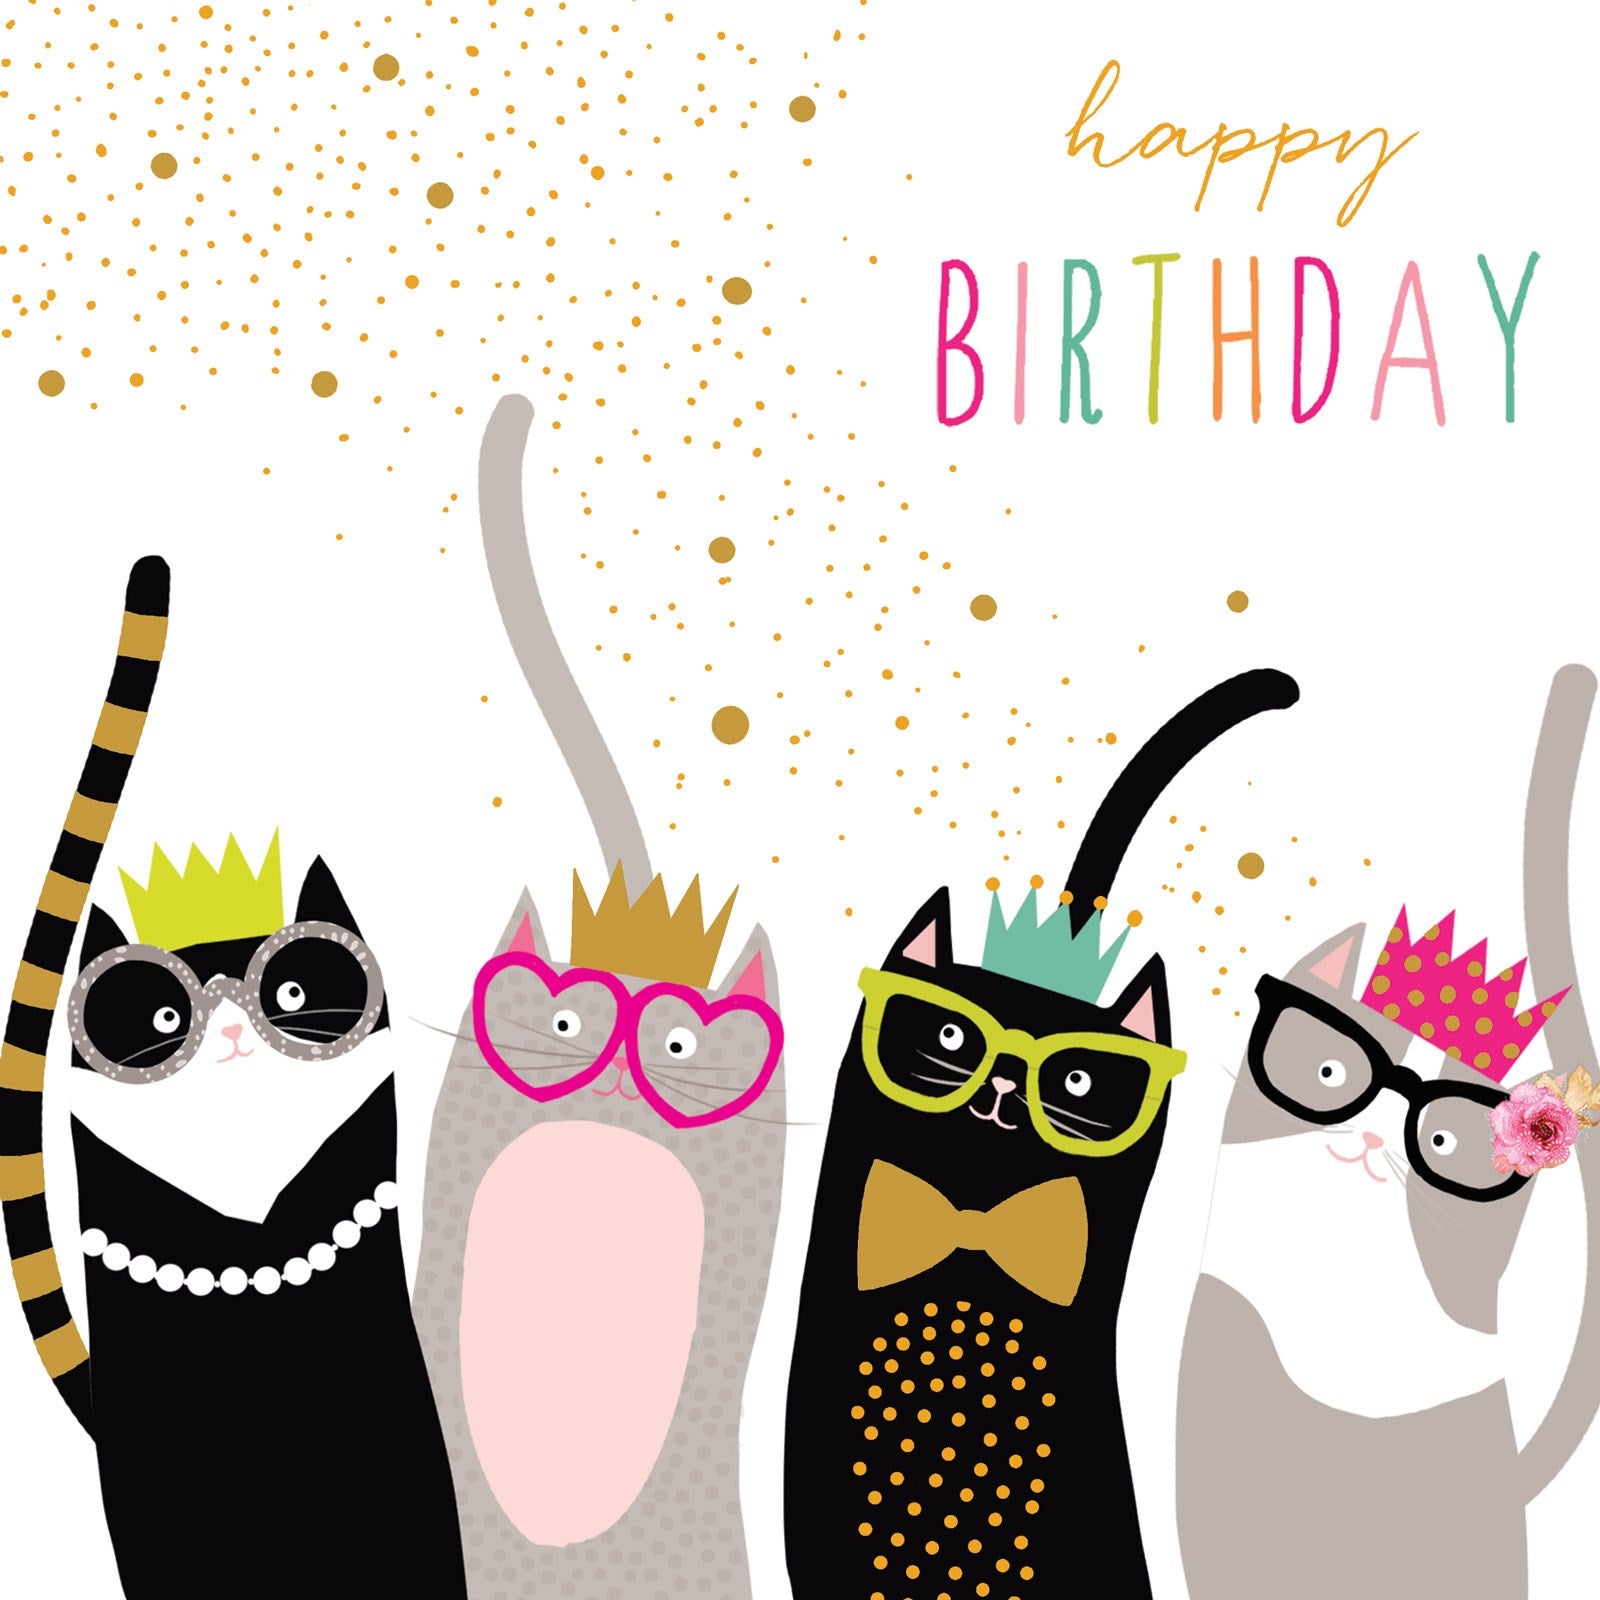 Party Cats Birthday Card | PURRFECT CAT GIFTS